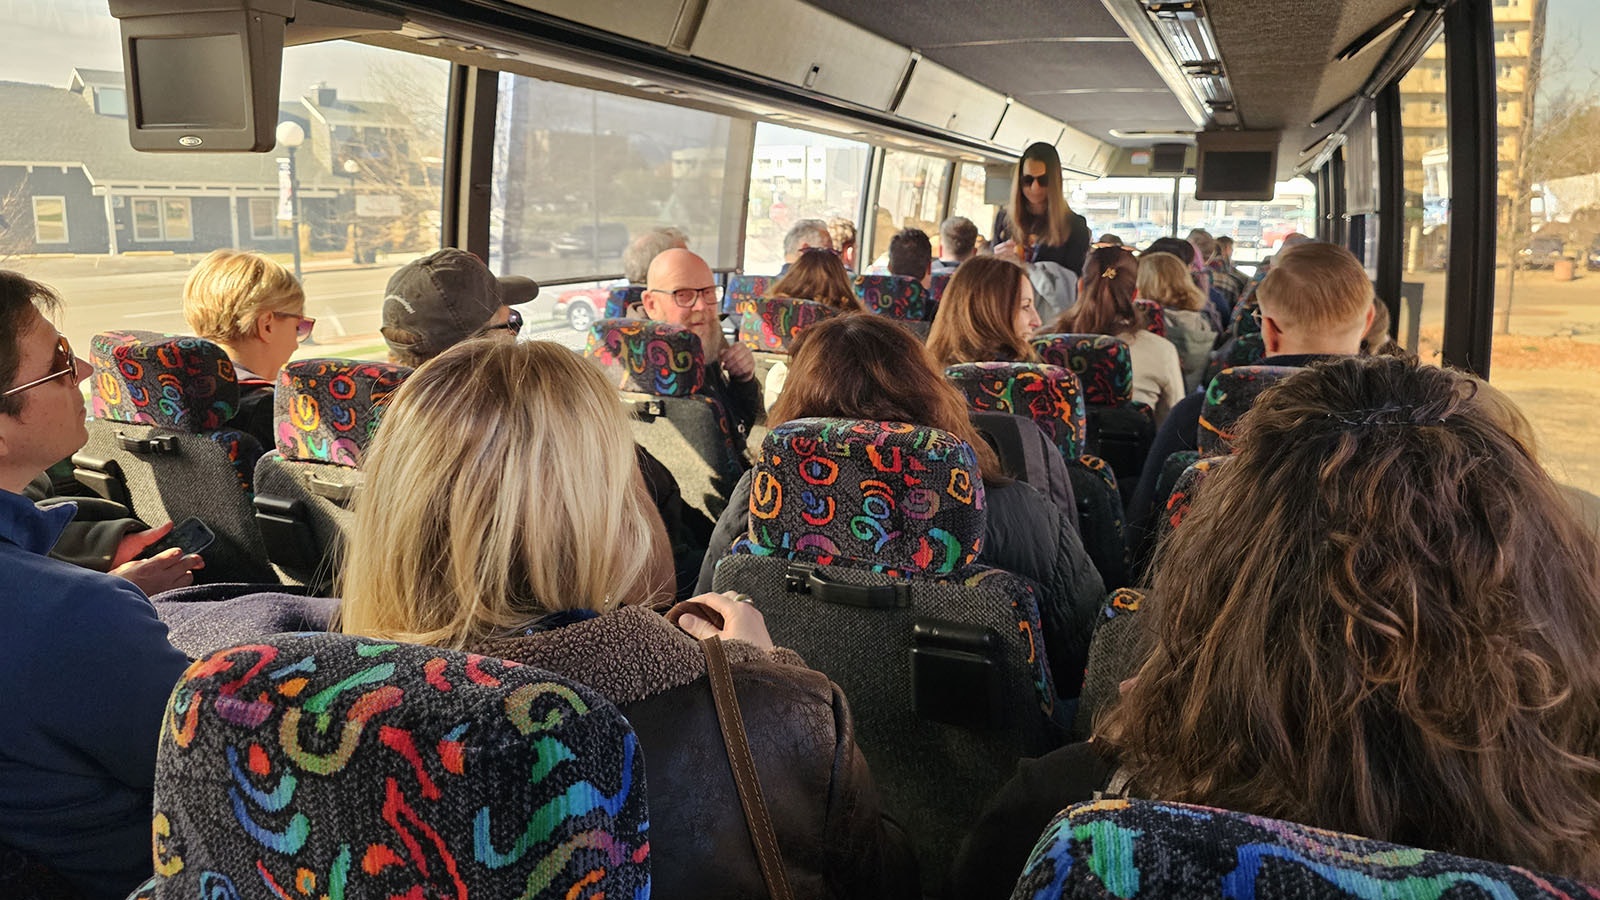 A busload of tourism agents from Australia and Europe went hands on in Casper to learn more about tourism opportunities in Wyoming.